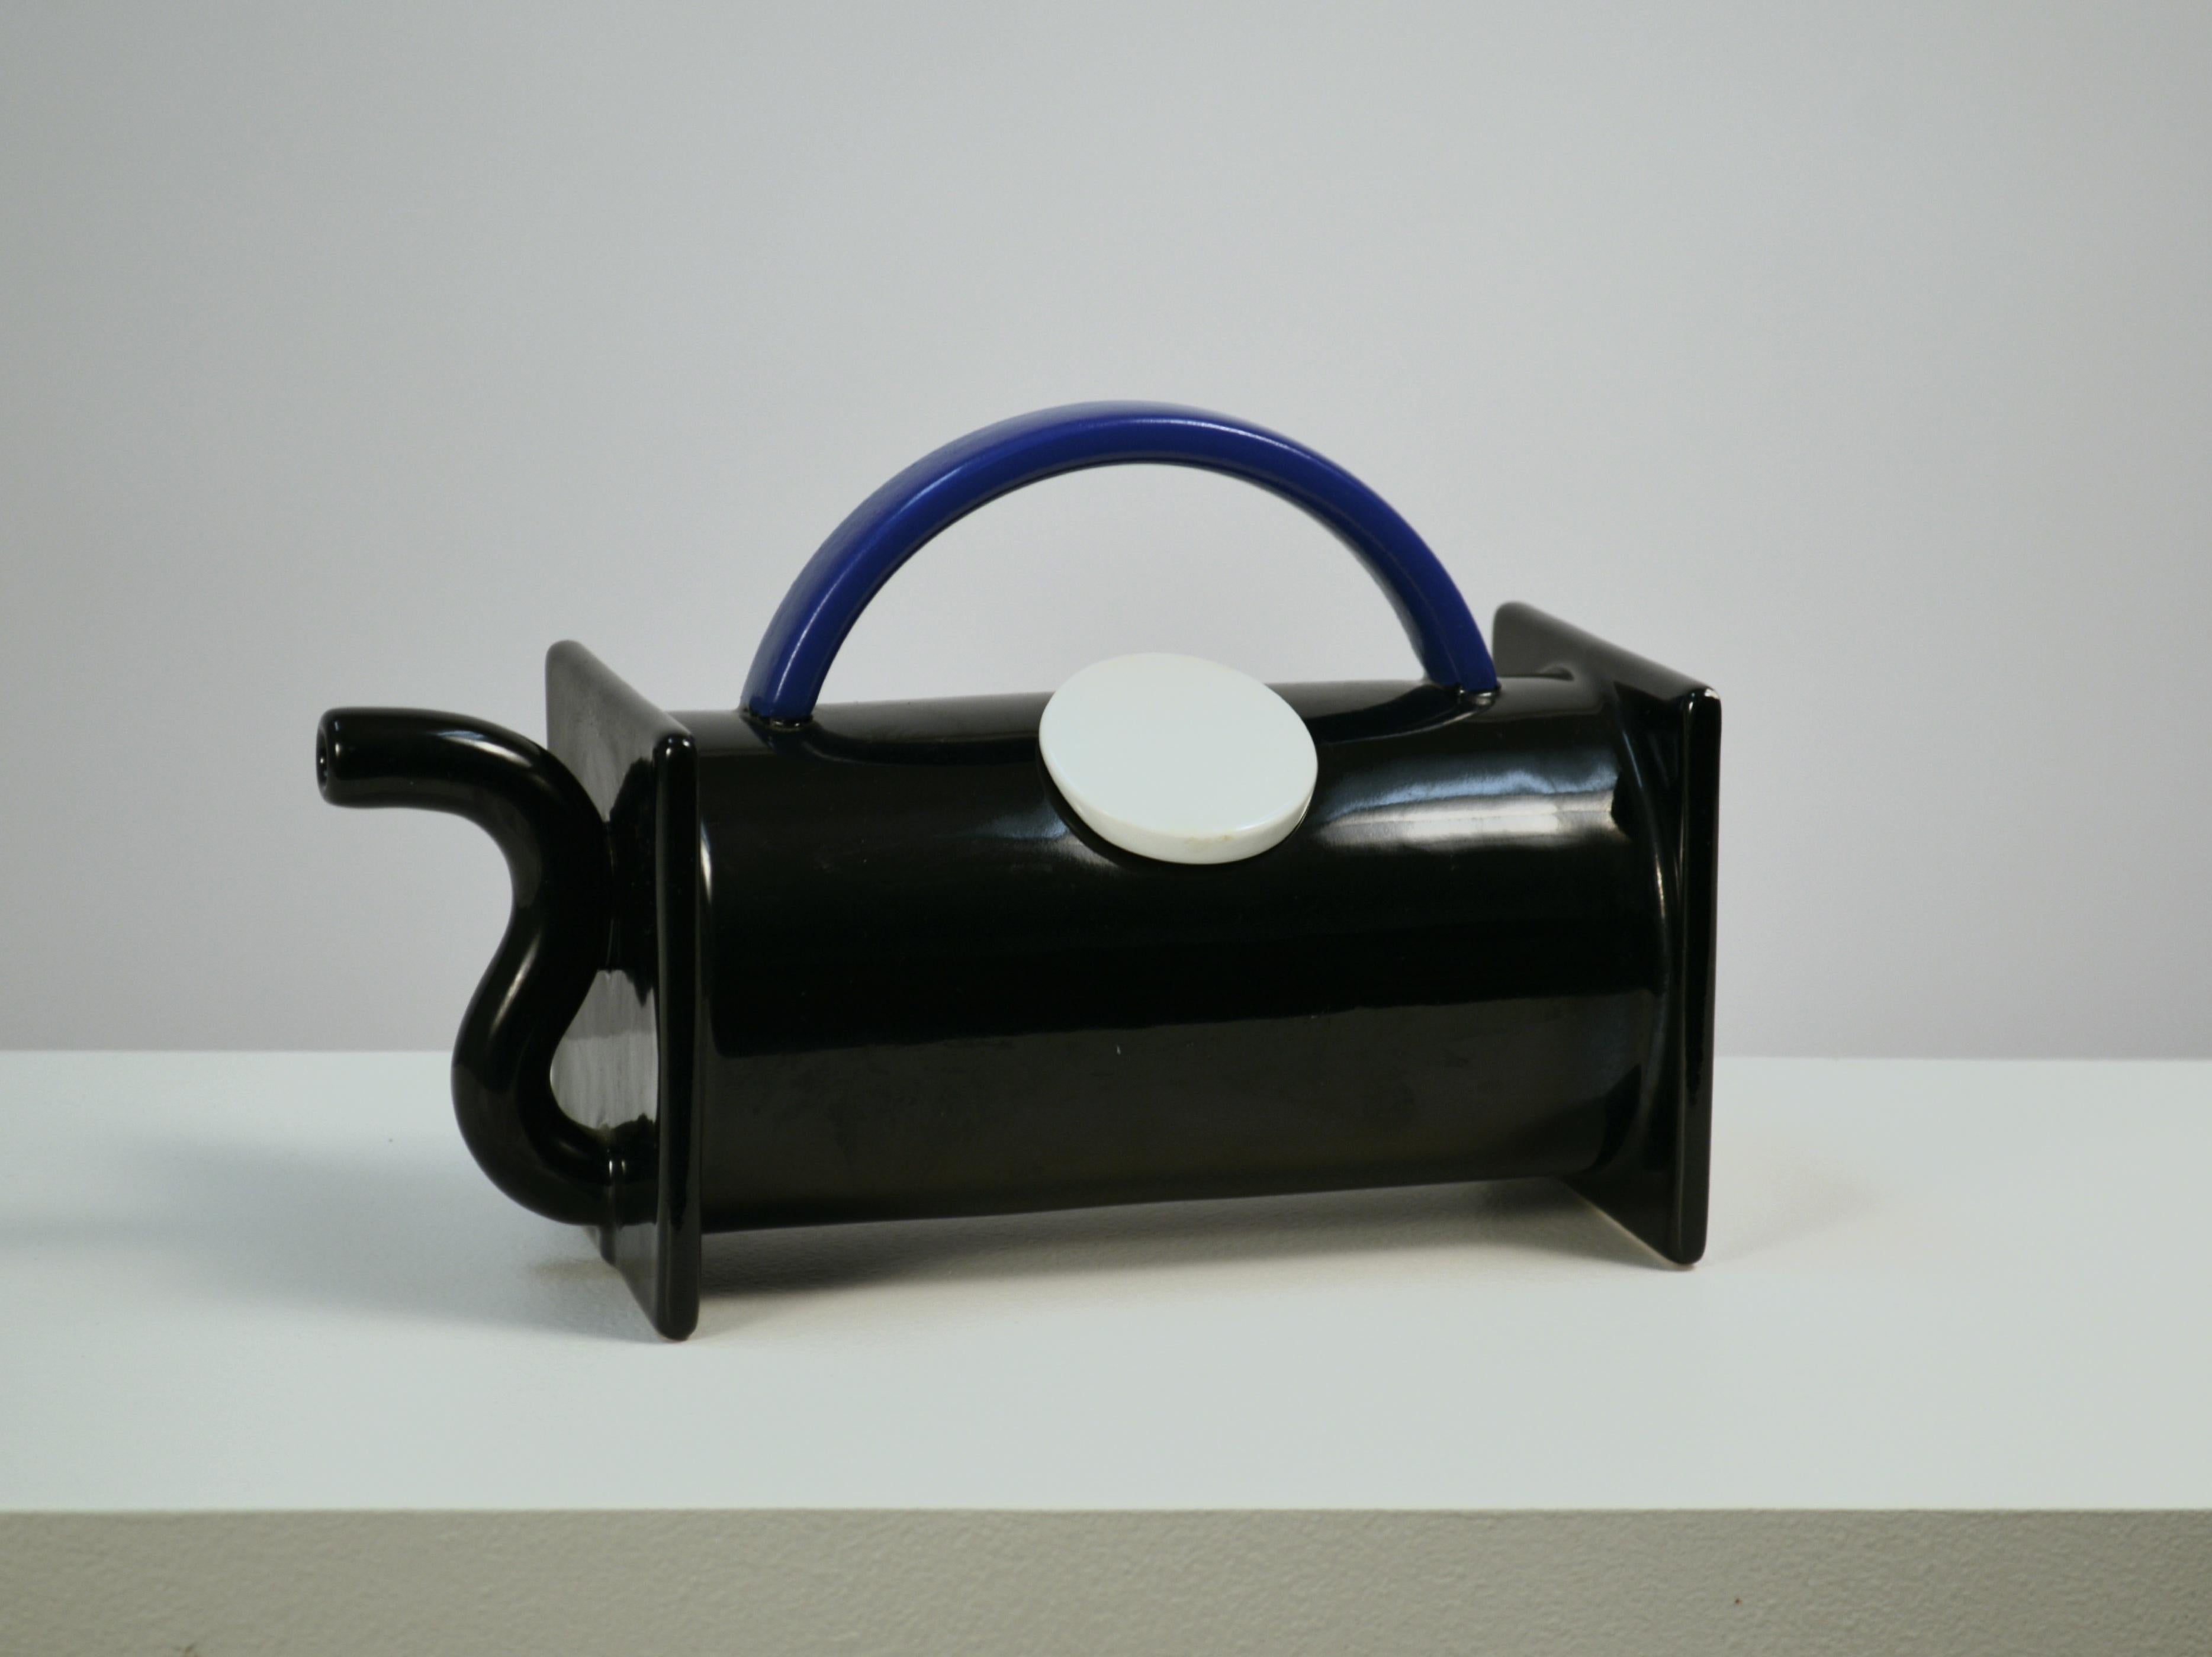 Memphis style teapot designed by Marco Zanini. This striking teapot is part of a collection of functional tableware pieces designed by Zanini in the 1980's, for Italian Ceramics Maker Bitossi. With strong geometric shapes and bold color scheme, this